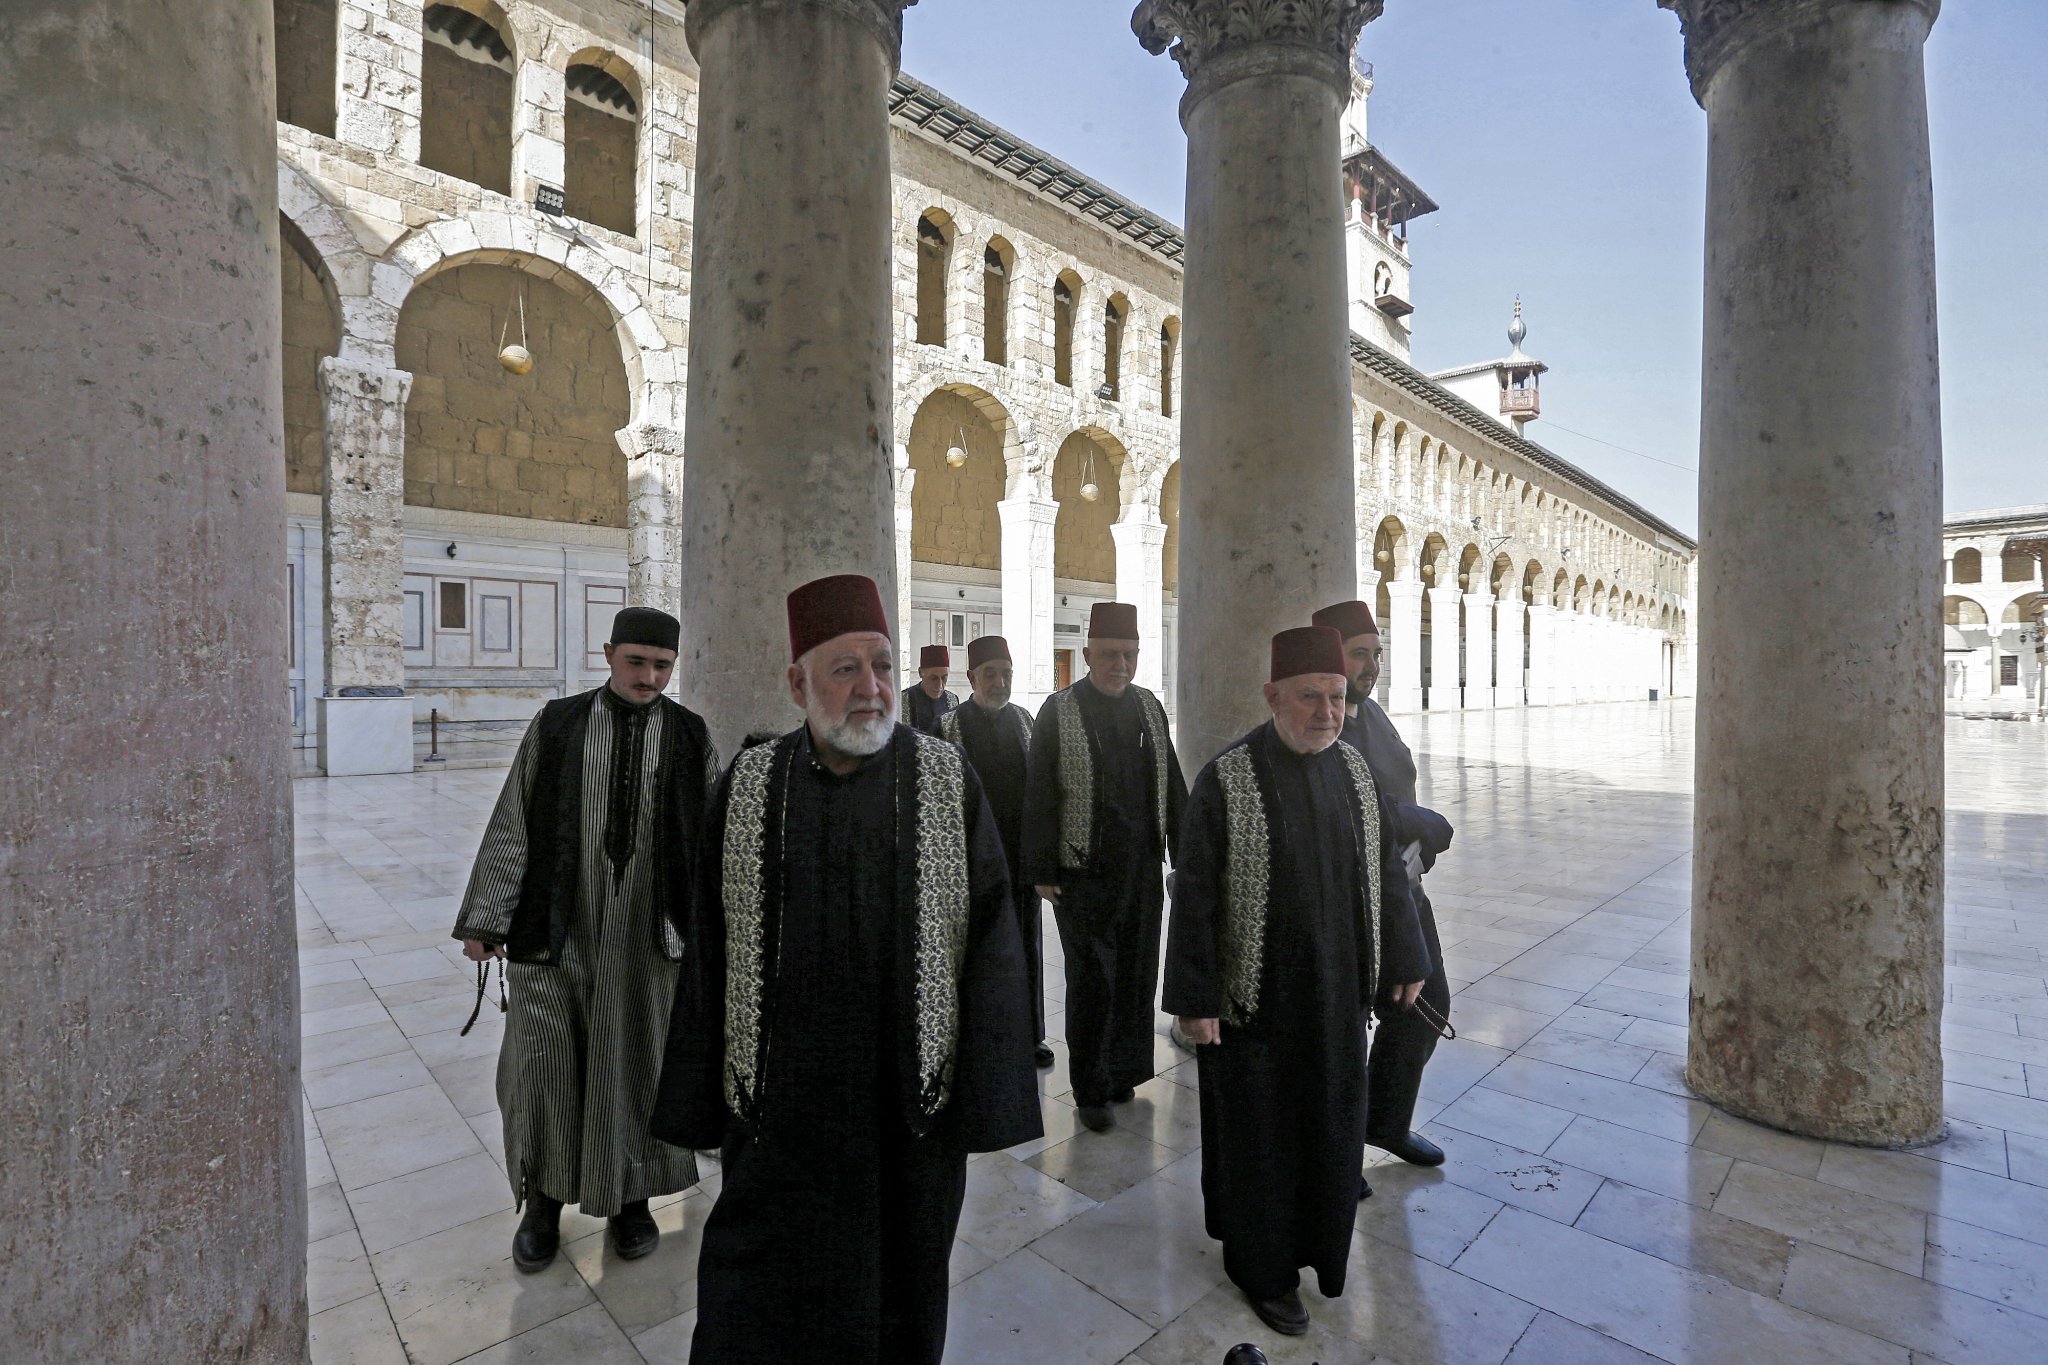 Muezzins, who call Muslims to prayer, arrive at the Umayyad Mosque in the ancient quarters of Damascus on March 11, 2020. Inside the Syrian capital's Great Umayyad Mosque, six muezzins sit before a loudspeaker, collectively reciting the call to prayer, their voices filling the air above the ancient quarters of Damascus. They are among 25 muezzins who take shifts